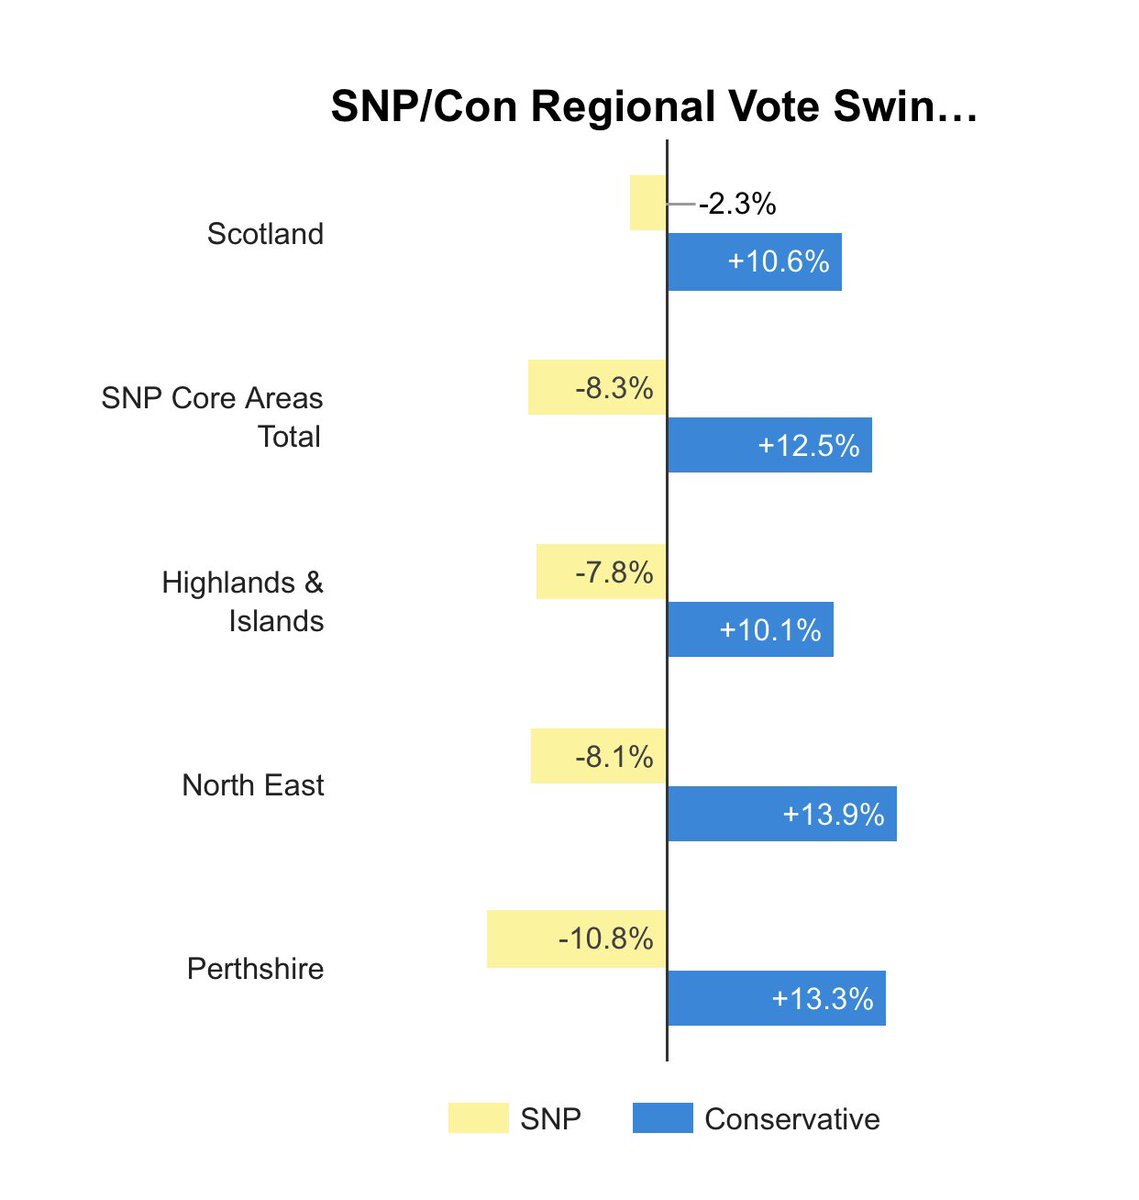 The North-East was and I’d argue still is fertile ground for the SCons.The 2016 swings were substantial and set the stage for the 2017 GE (where SCons won numerous NE seats from SNP on big swings)(7/14)